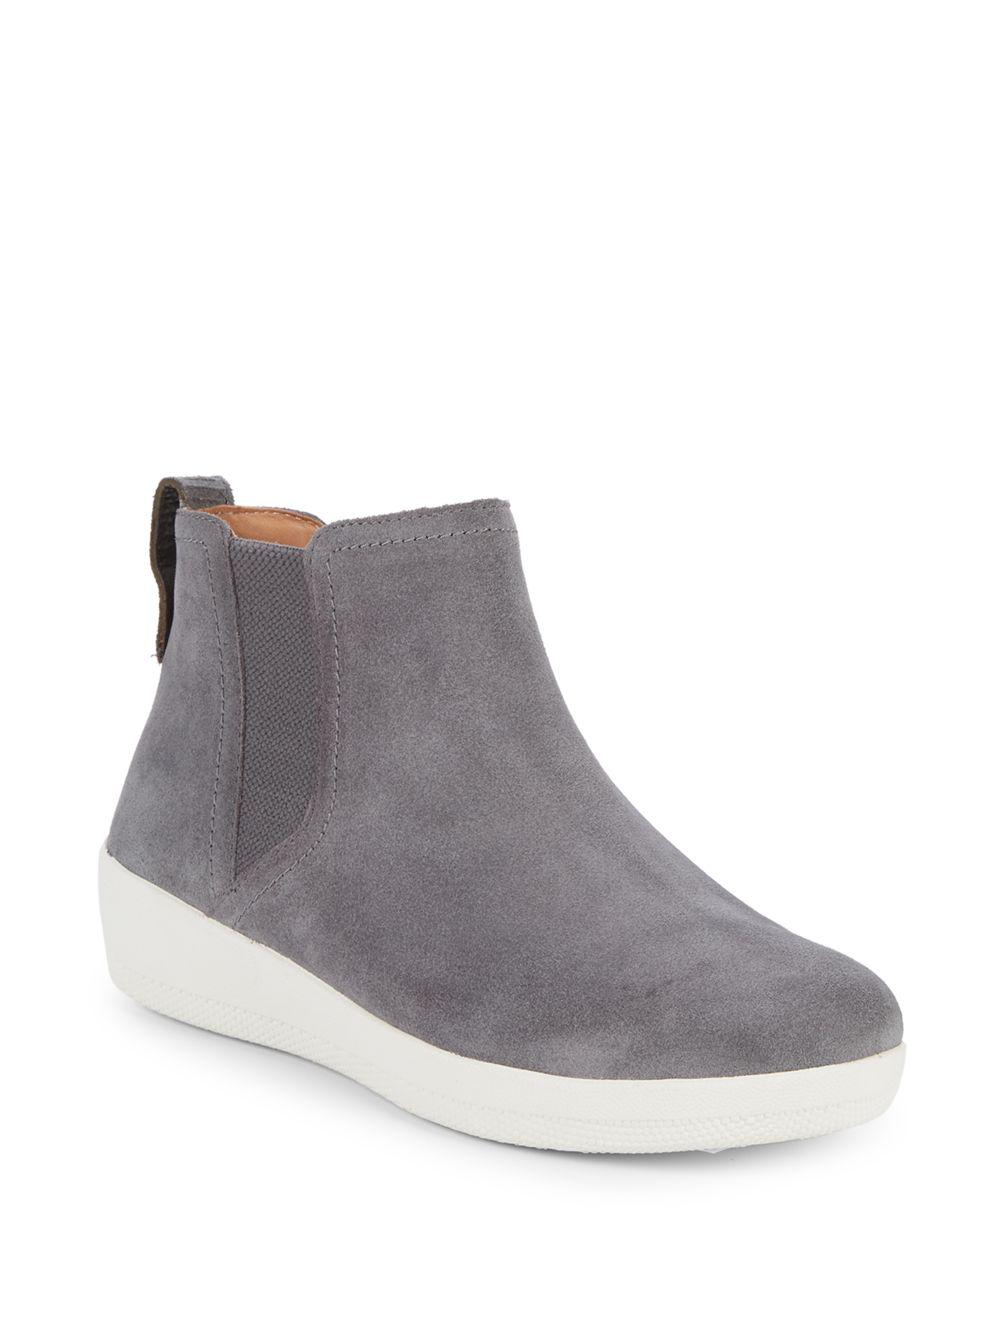 Lyst - Fitflop Suede Flat Ankle Boots in Gray